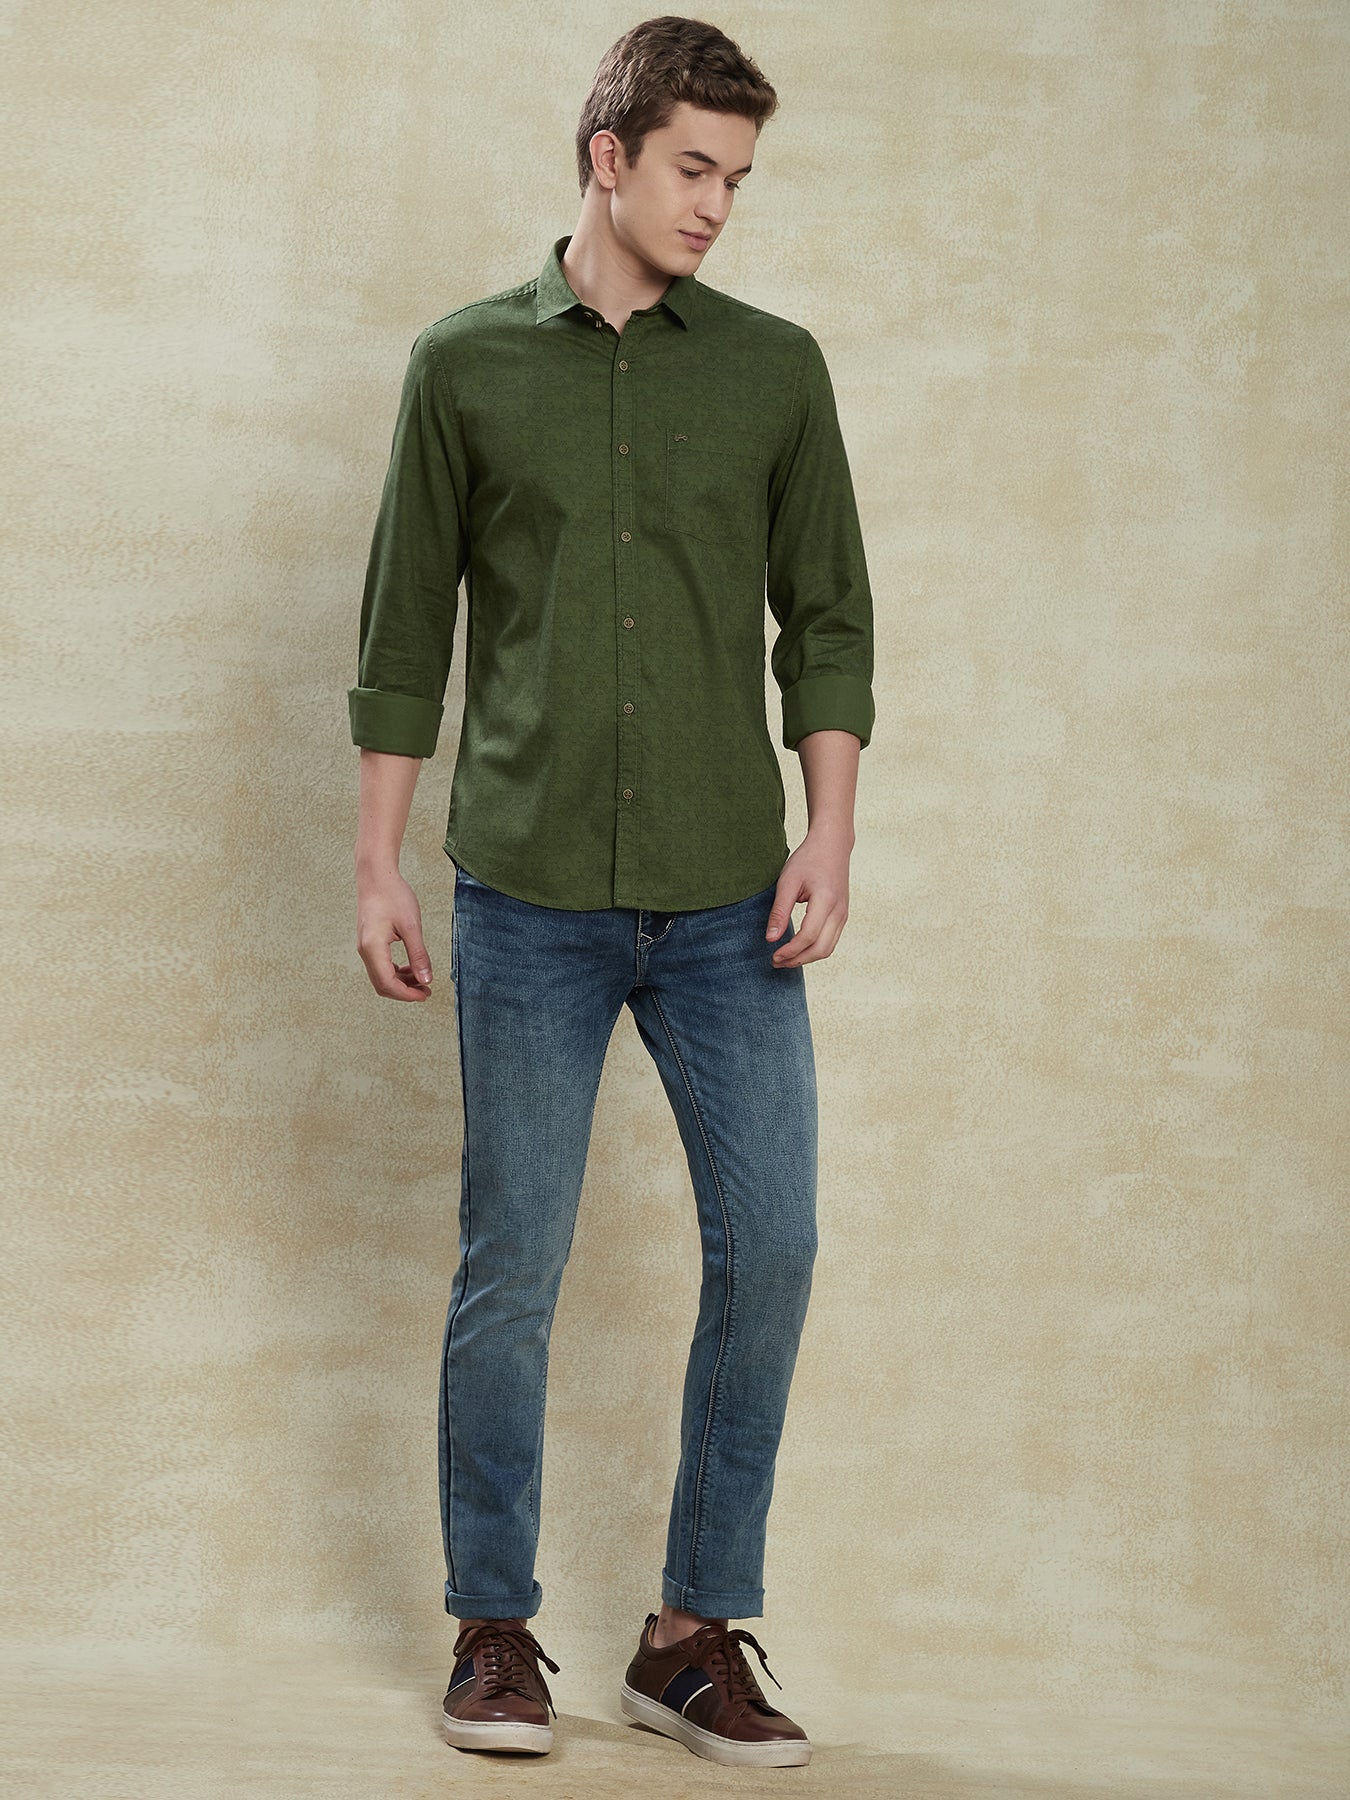 100% Cotton Olive Green Printed Slim Fit Full Sleeve Casual Shirt